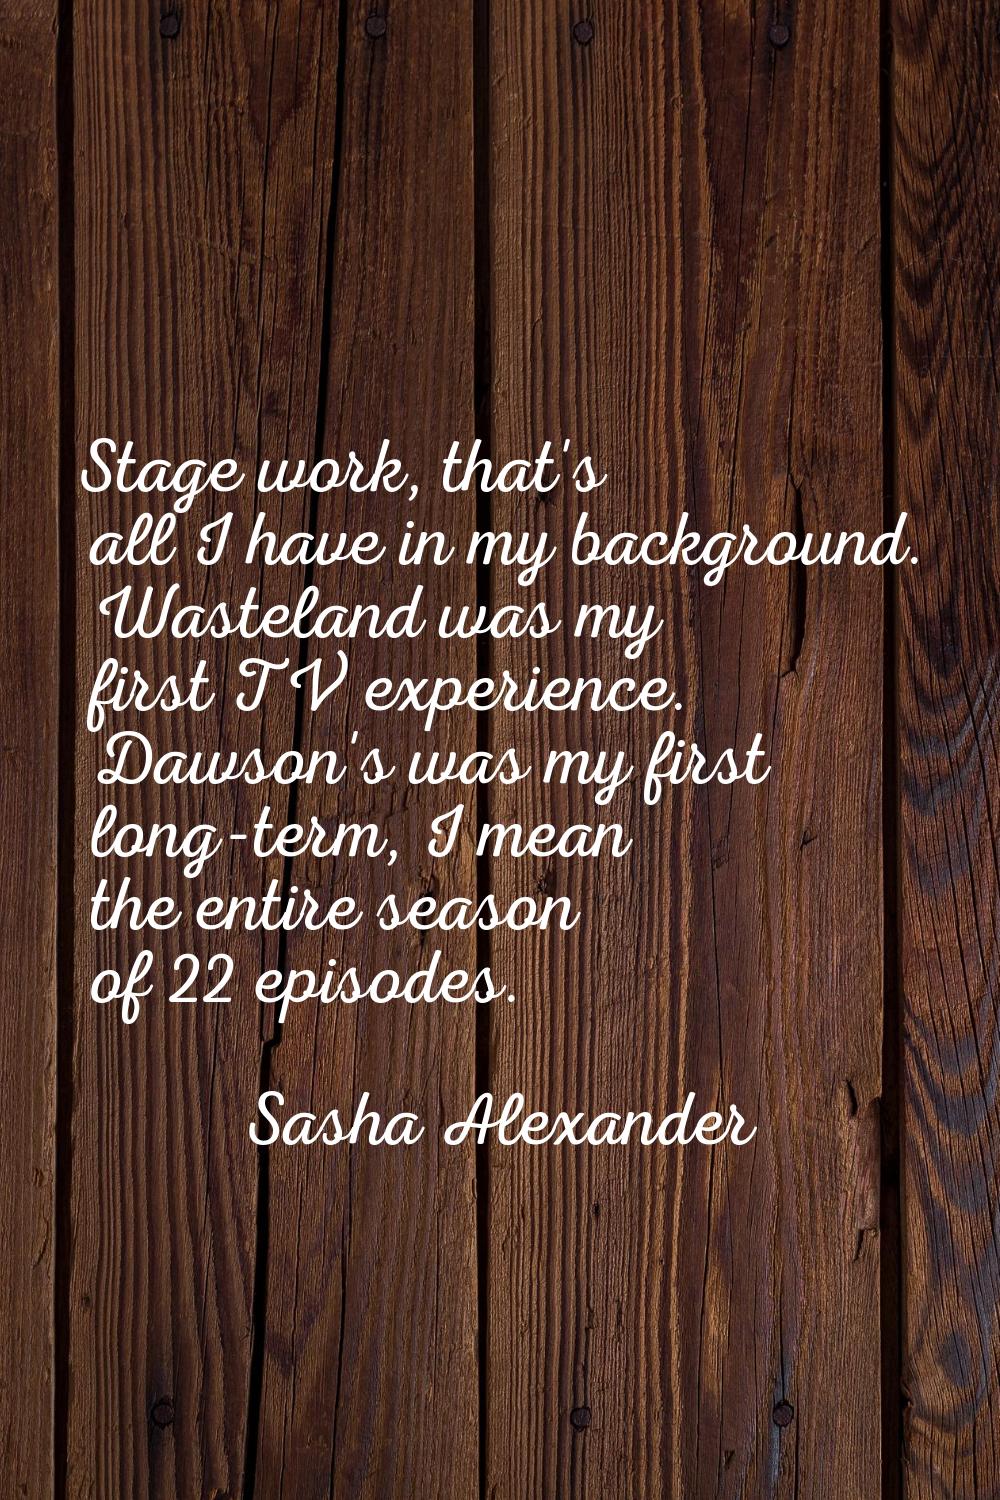 Stage work, that's all I have in my background. Wasteland was my first TV experience. Dawson's was 